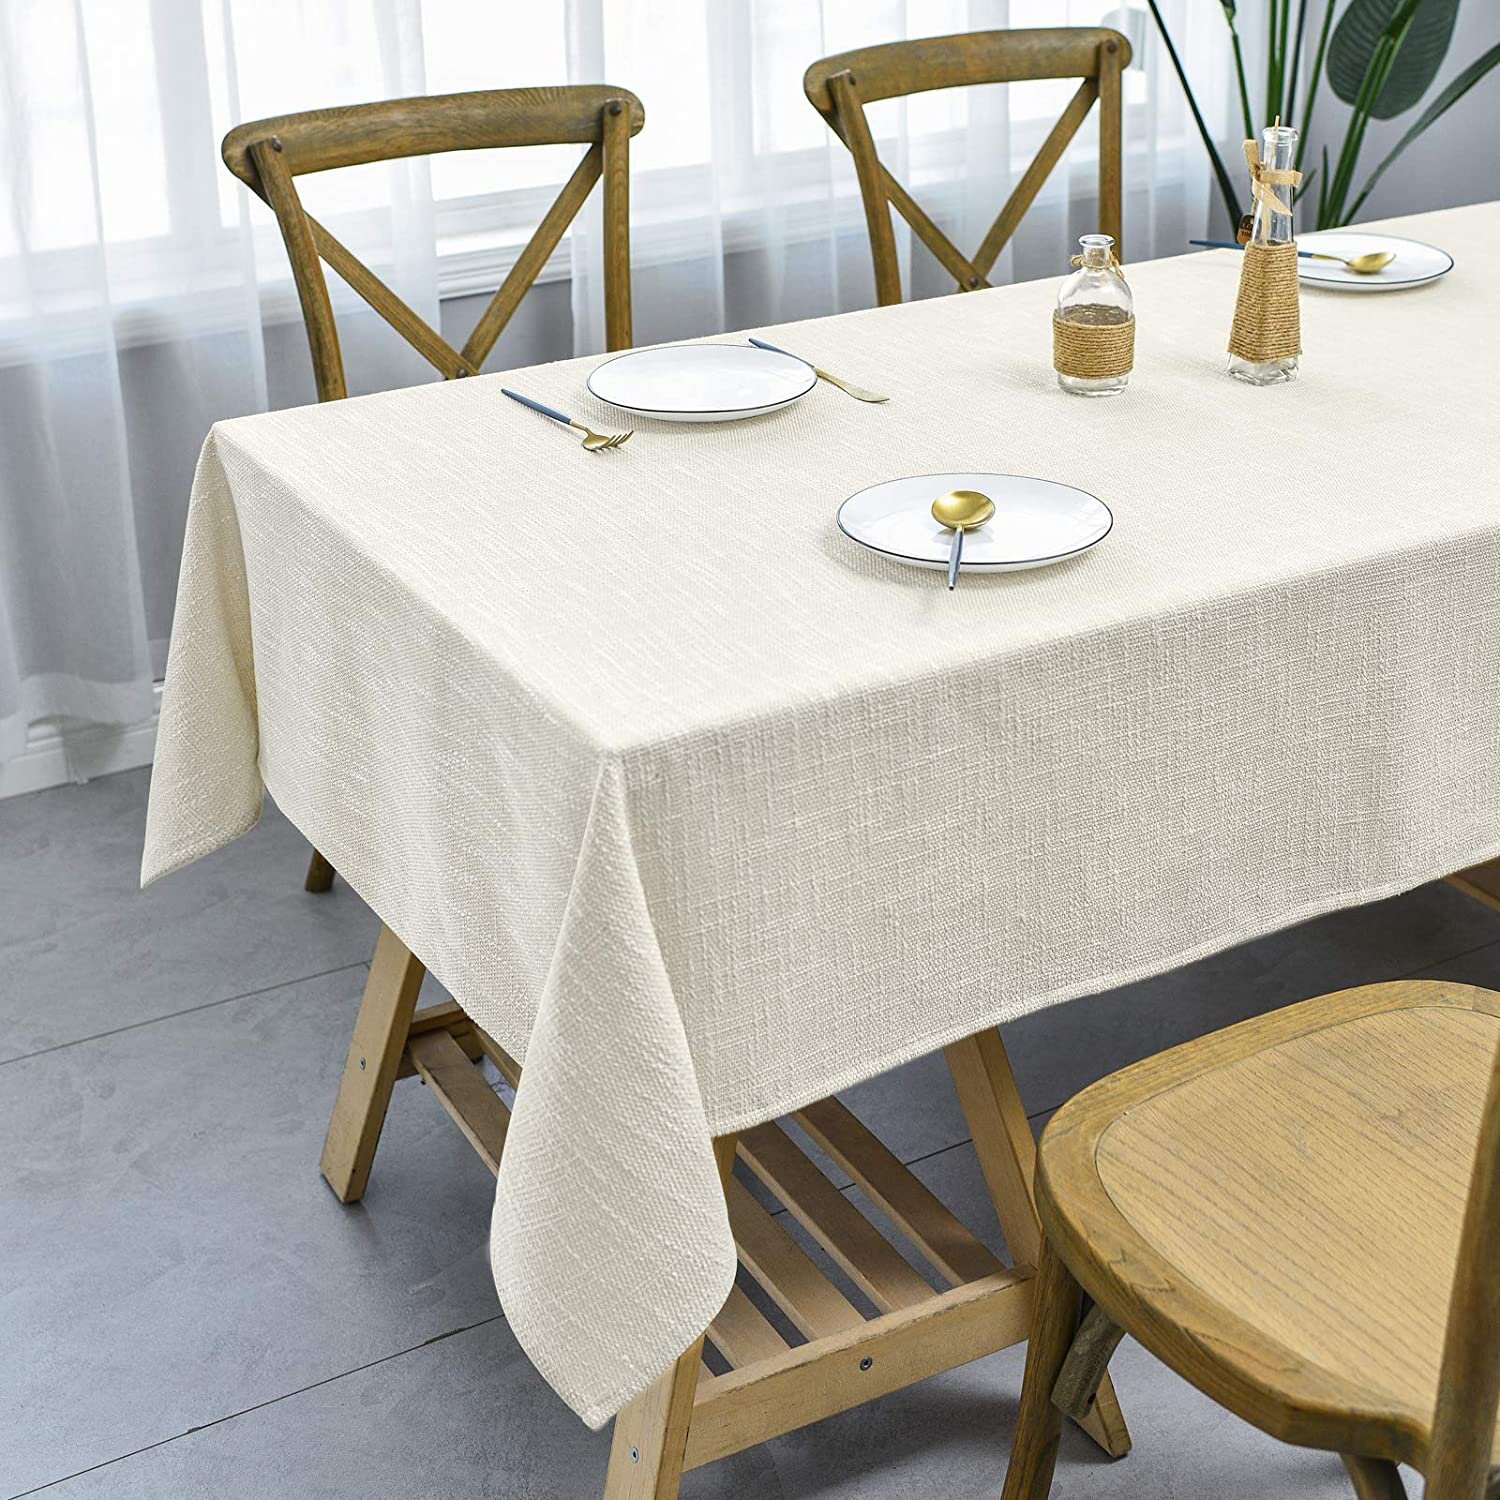 Happy New Year 2021 Table Cloth Rectangle 54 X 72 Inch,Rectangular Tablecloth Polyester Table Cover for Kitchen Dinning Tabletop Decor 